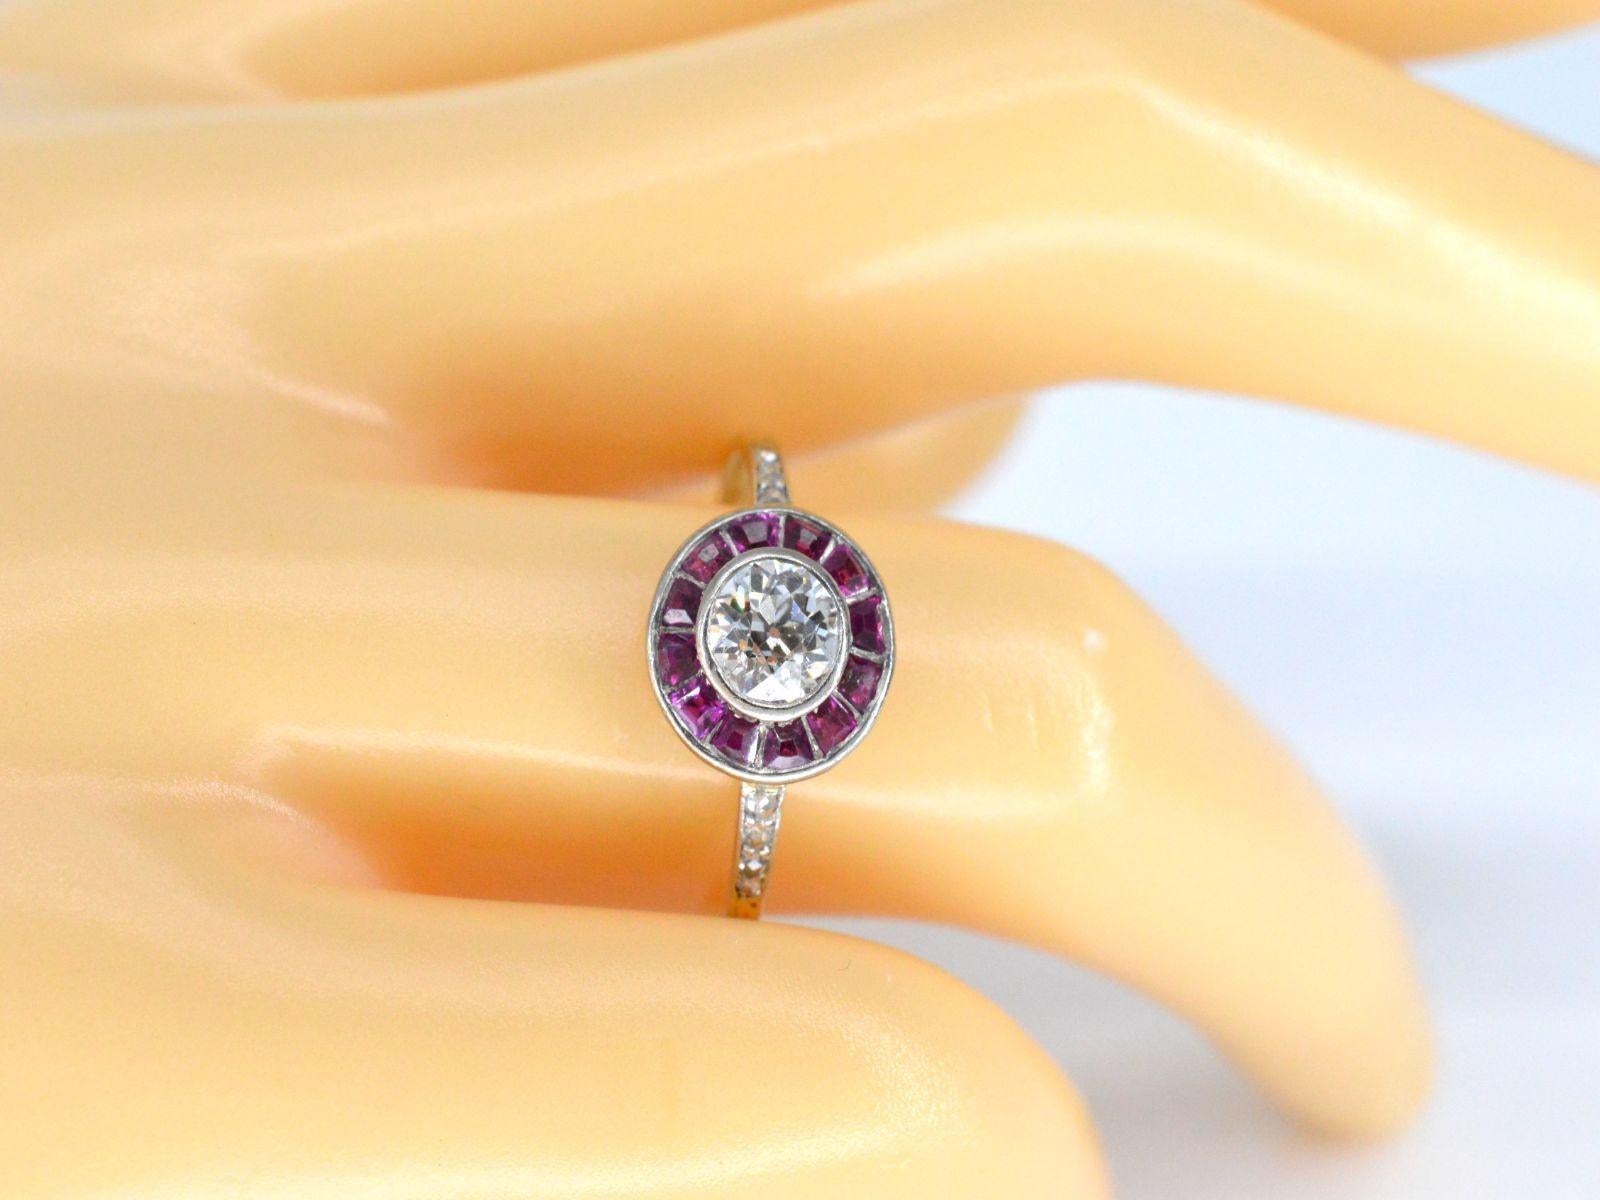 This vintage ring features a distinctive combination of diamonds and rubies, set in a classic design. The central diamond weighs 0.75 carats and is cut in an old-cut style, with a color grade of F-G and VS purity. Additionally, there are 8 smaller